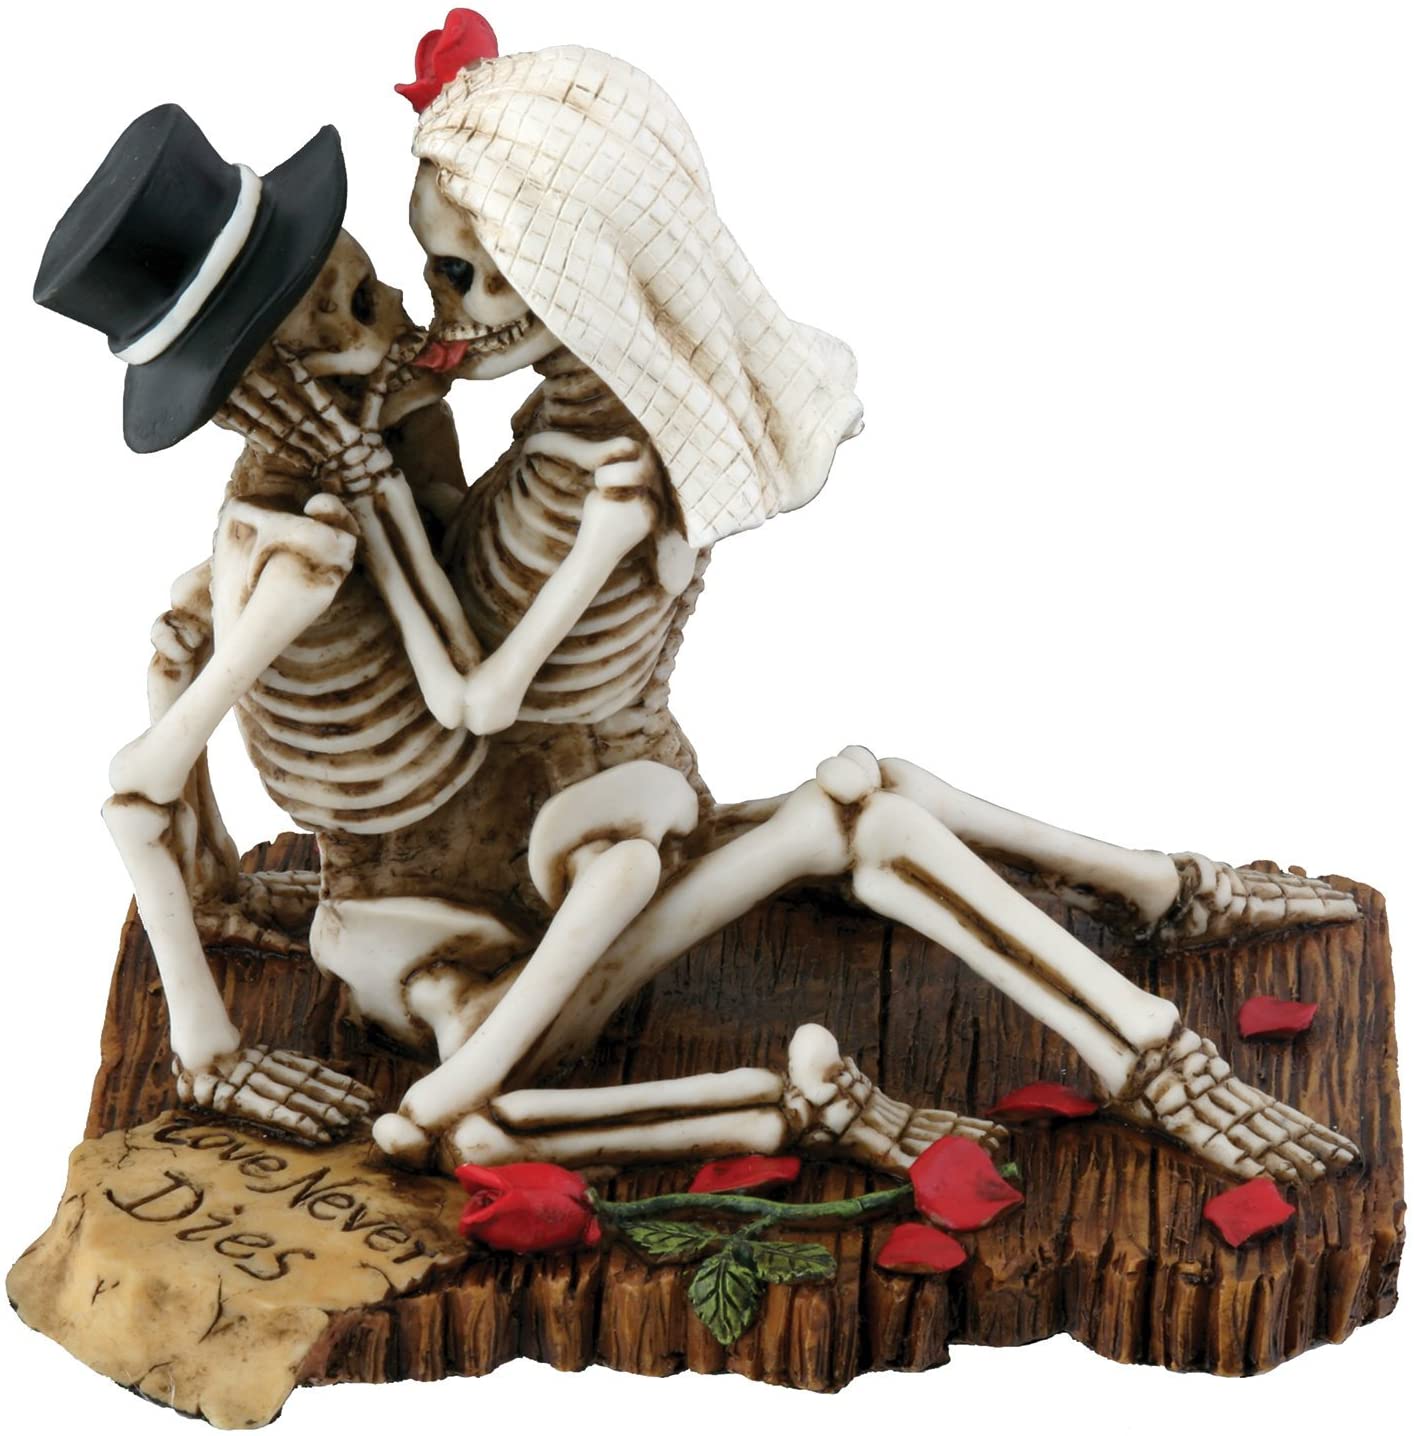 SUMMIT COLLECTION Love Never Dies Passionate Wedding Skeleton Couple Figurine, Resin Desk and Shelf Decoration